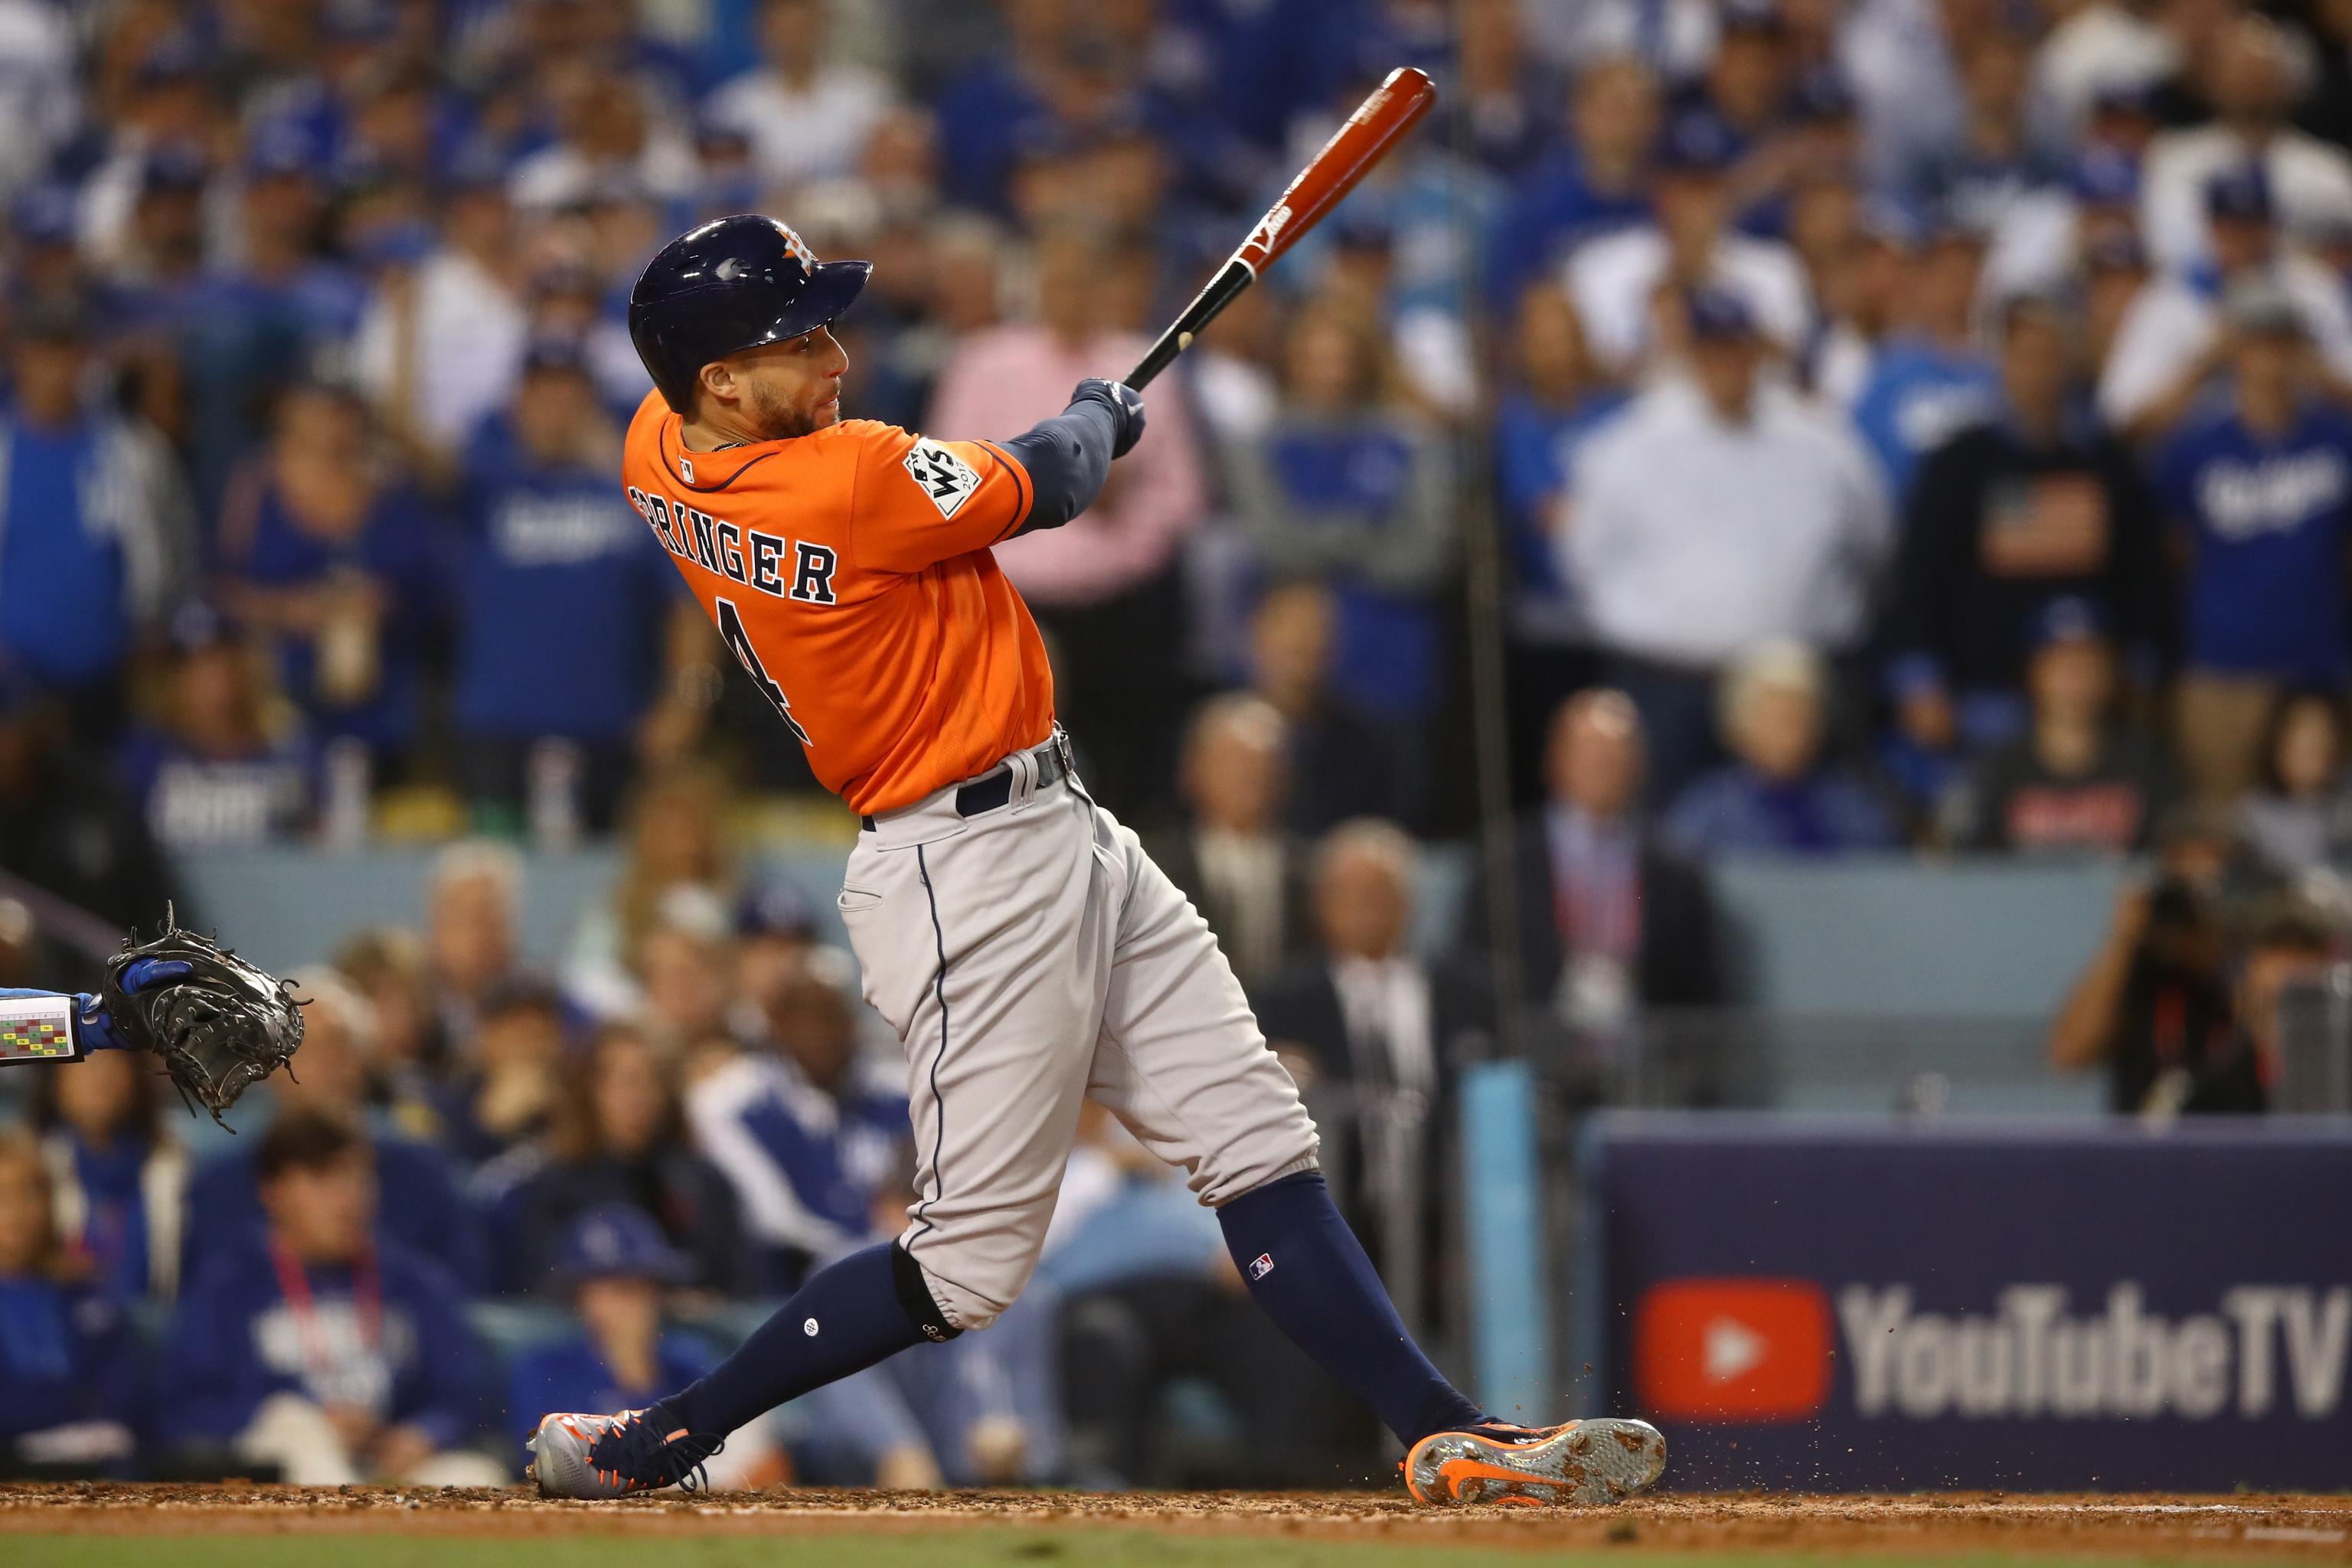 Highlights from the Astros' World Series Game 7 win over the Dodgers 